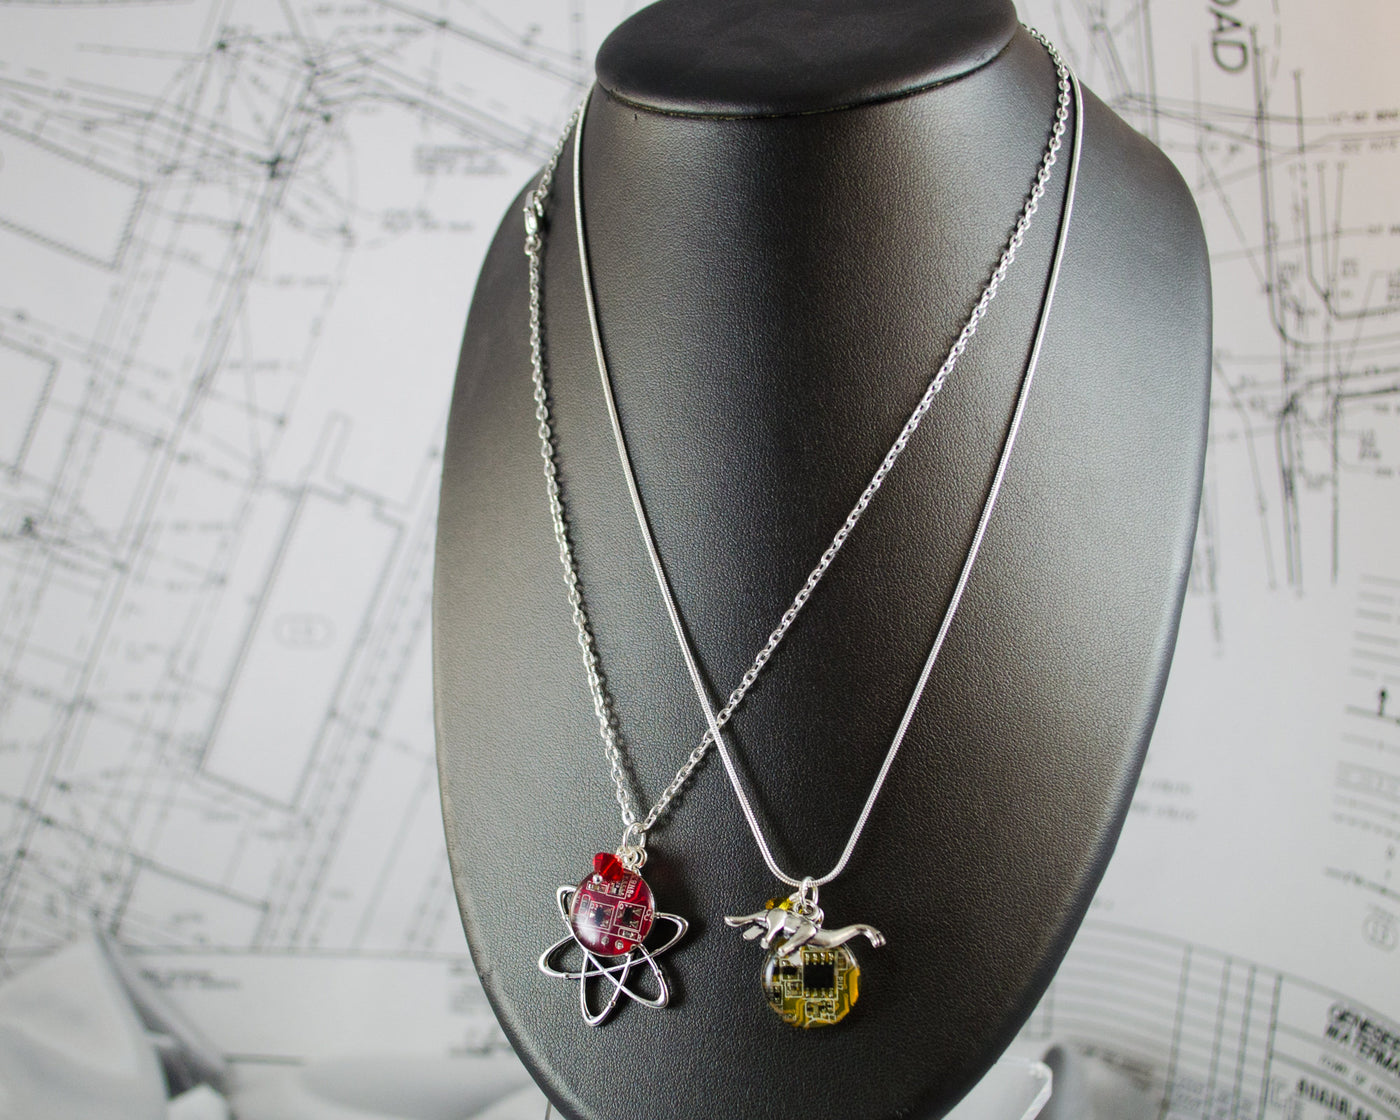 Rocket and Circuit Board Charm Necklace